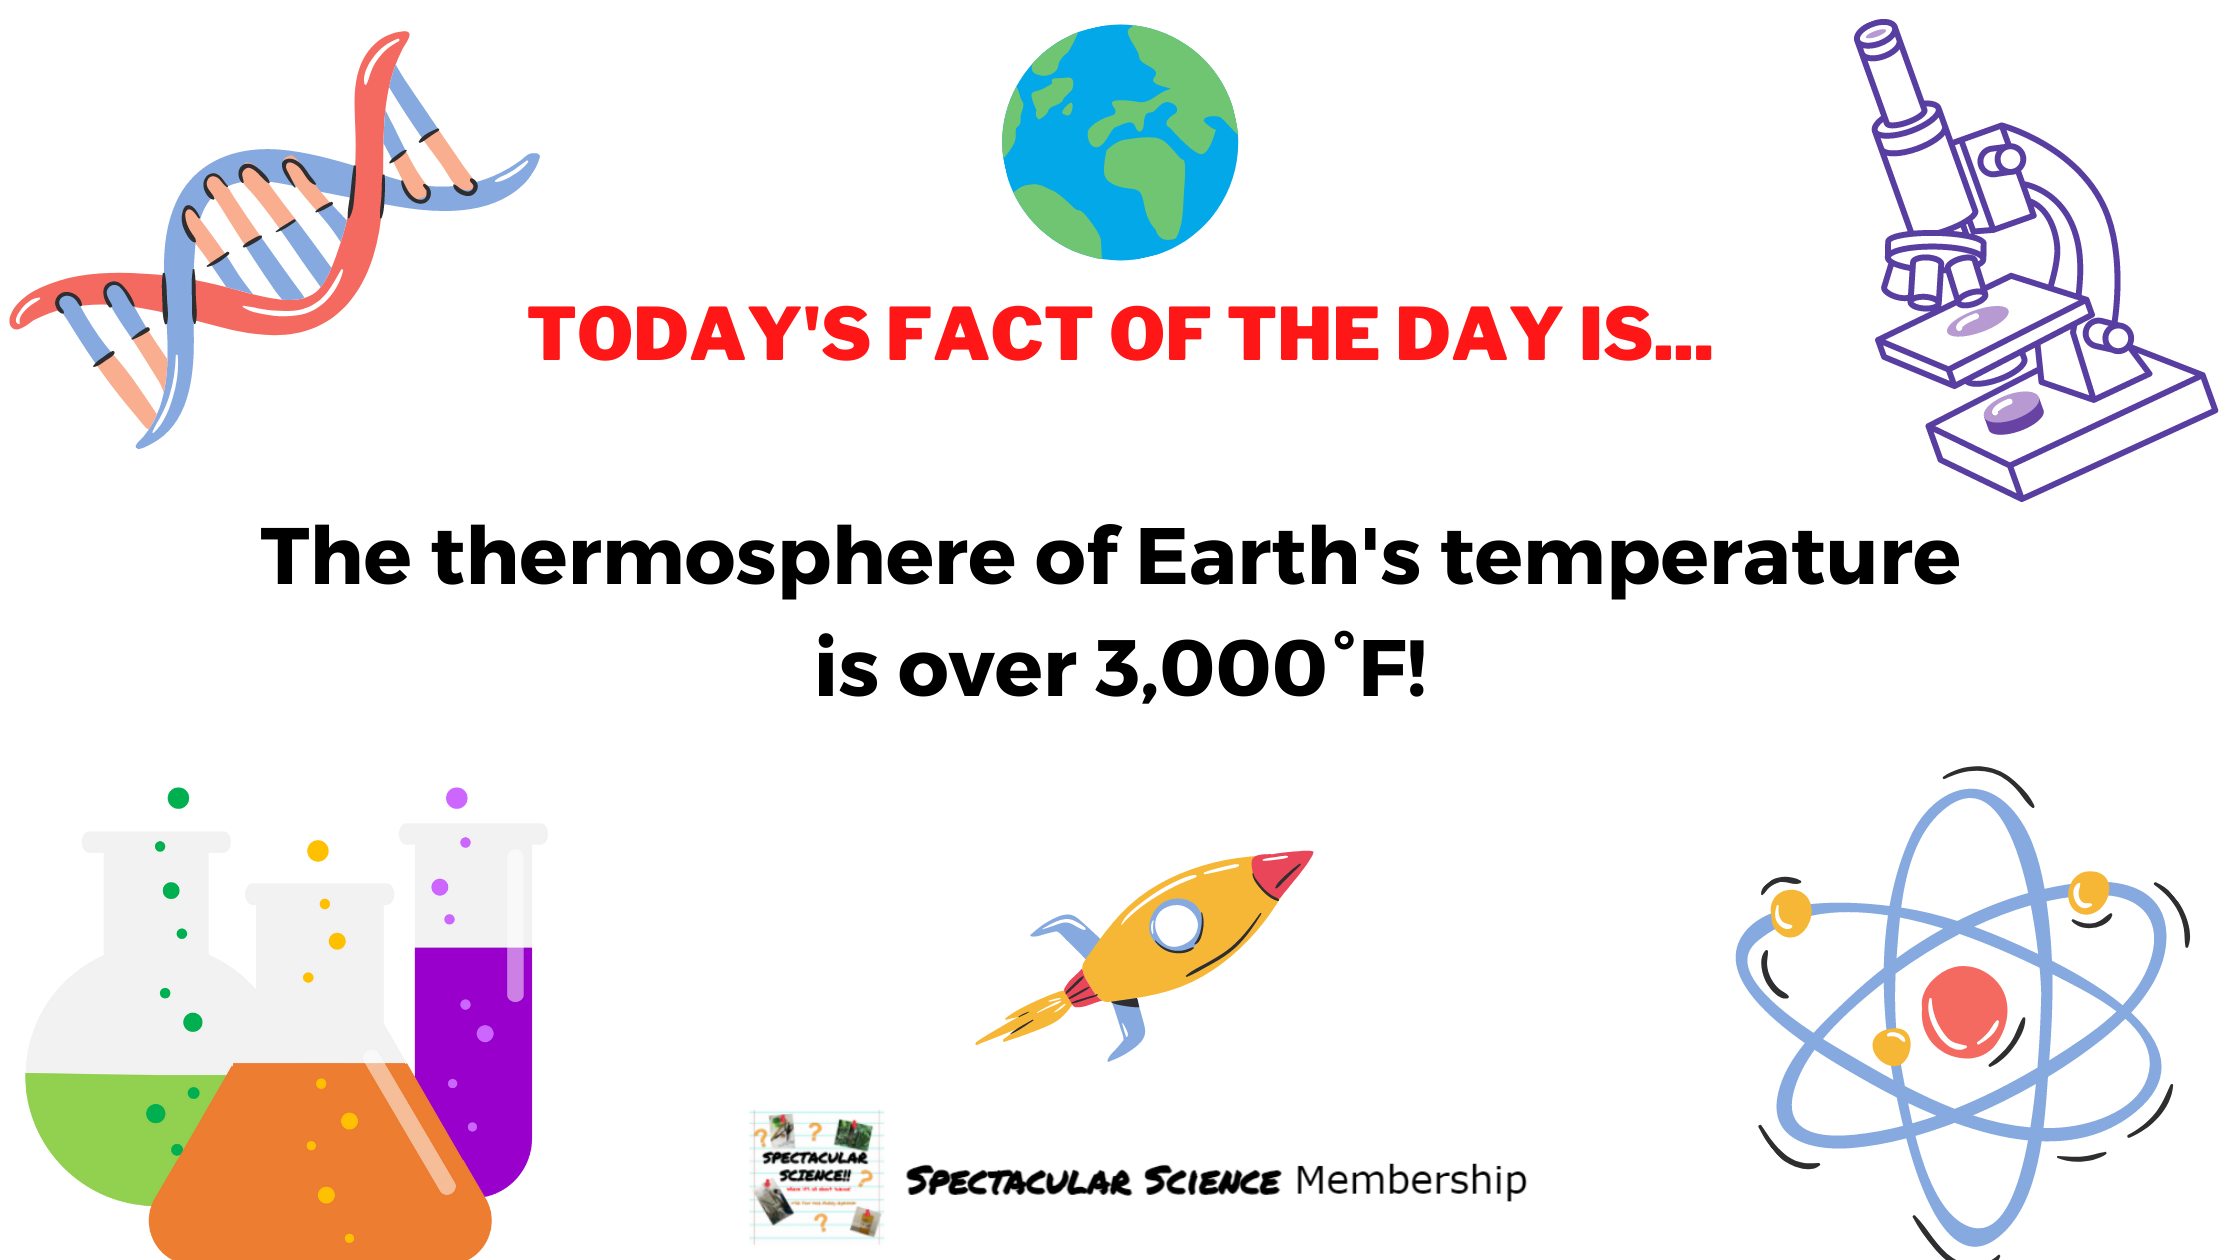 Fact of the Day Image Feb. 12th